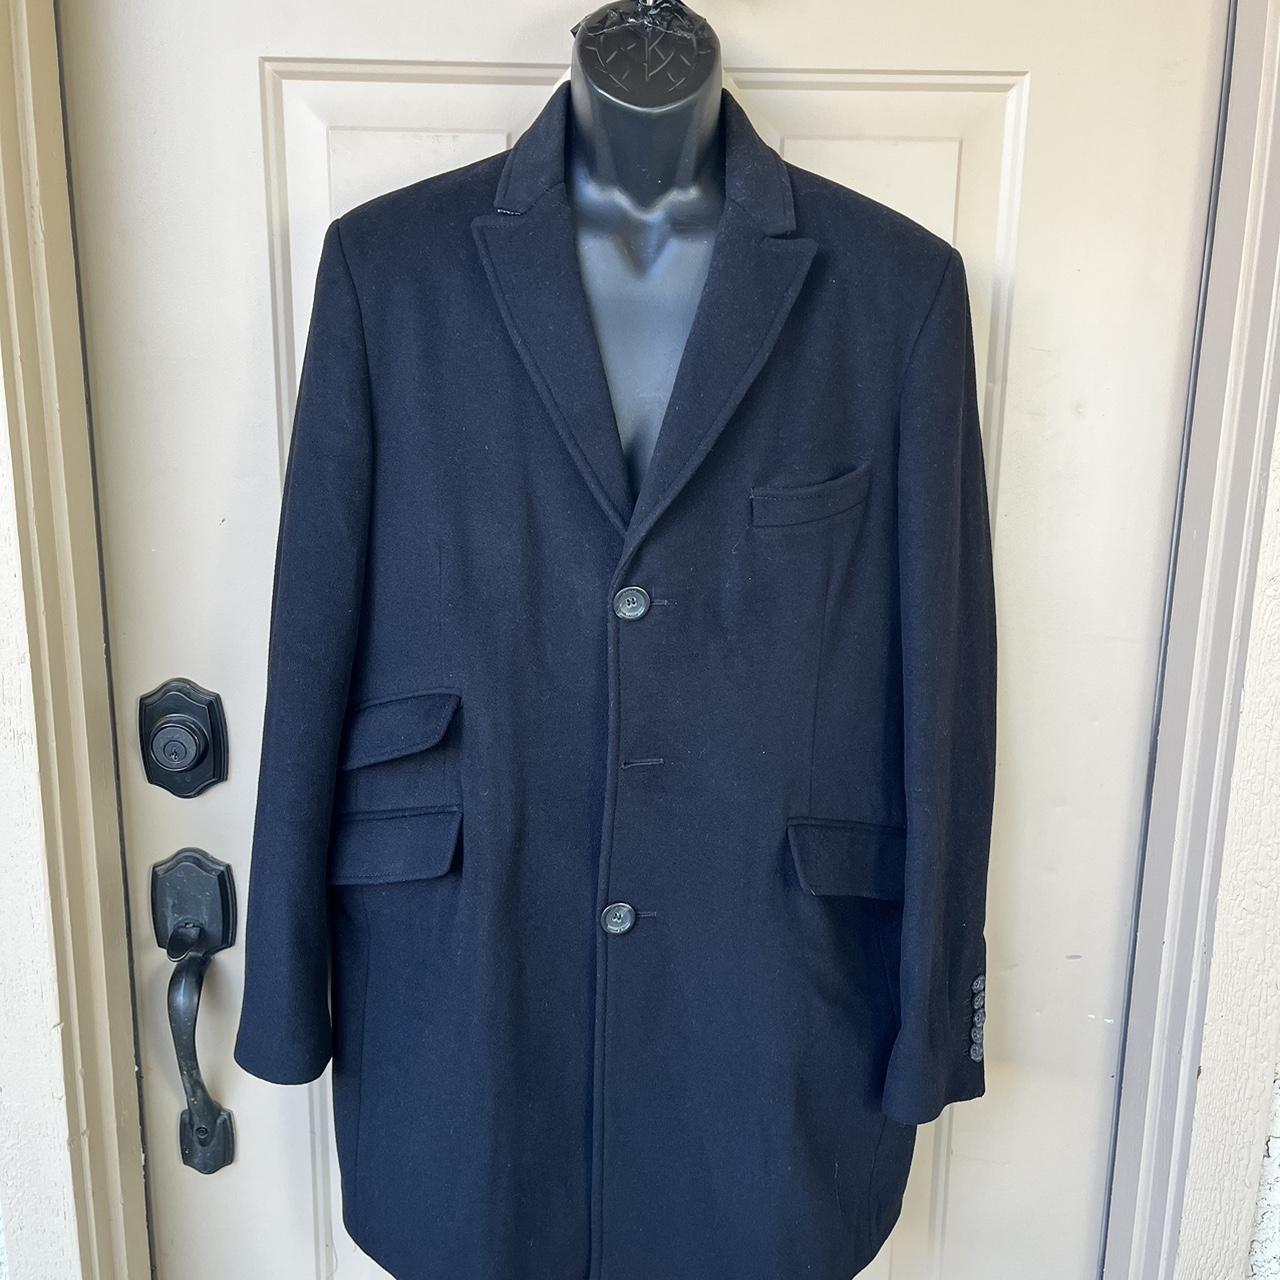 Guess Black Wool Cashmere Peacoat Single Breasted... - Depop